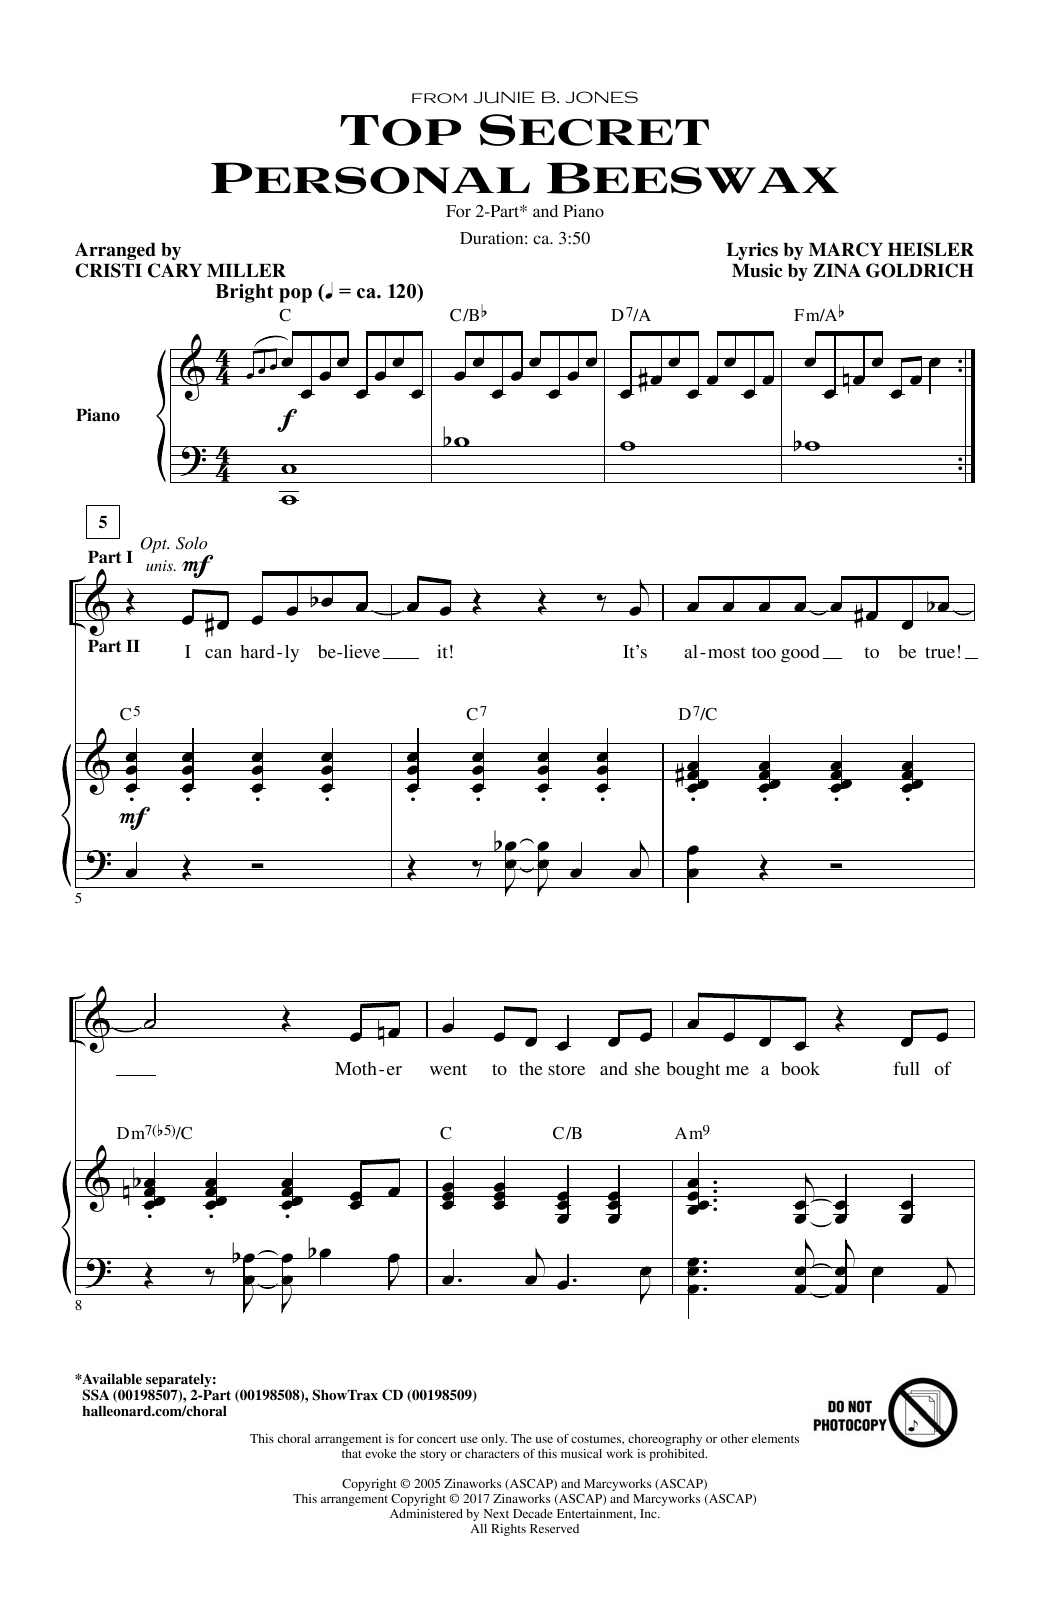 Cristi Cary Miller Top Secret Personal Beeswax sheet music notes and chords. Download Printable PDF.